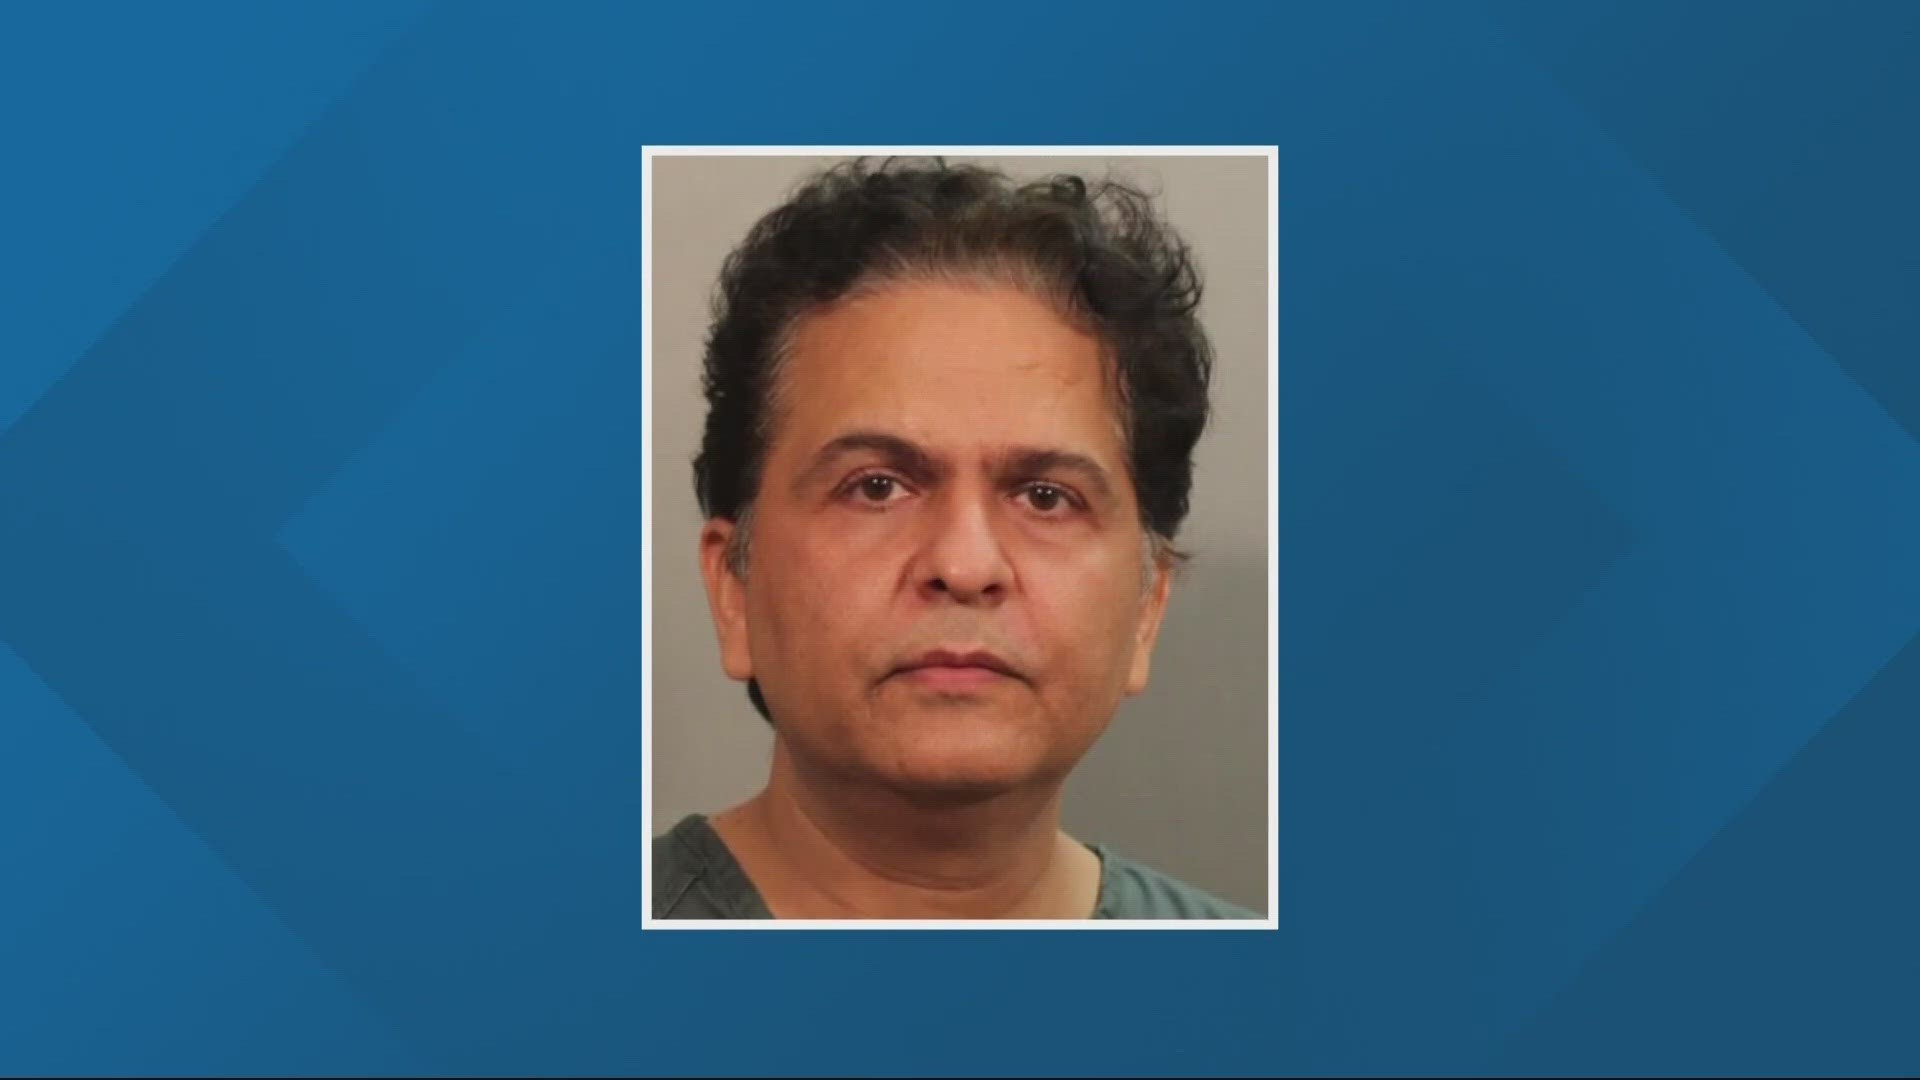 Dr. Om Kapoor, who continues to practice, has not been required to register as a sex offender following two cases filed as sex crimes.